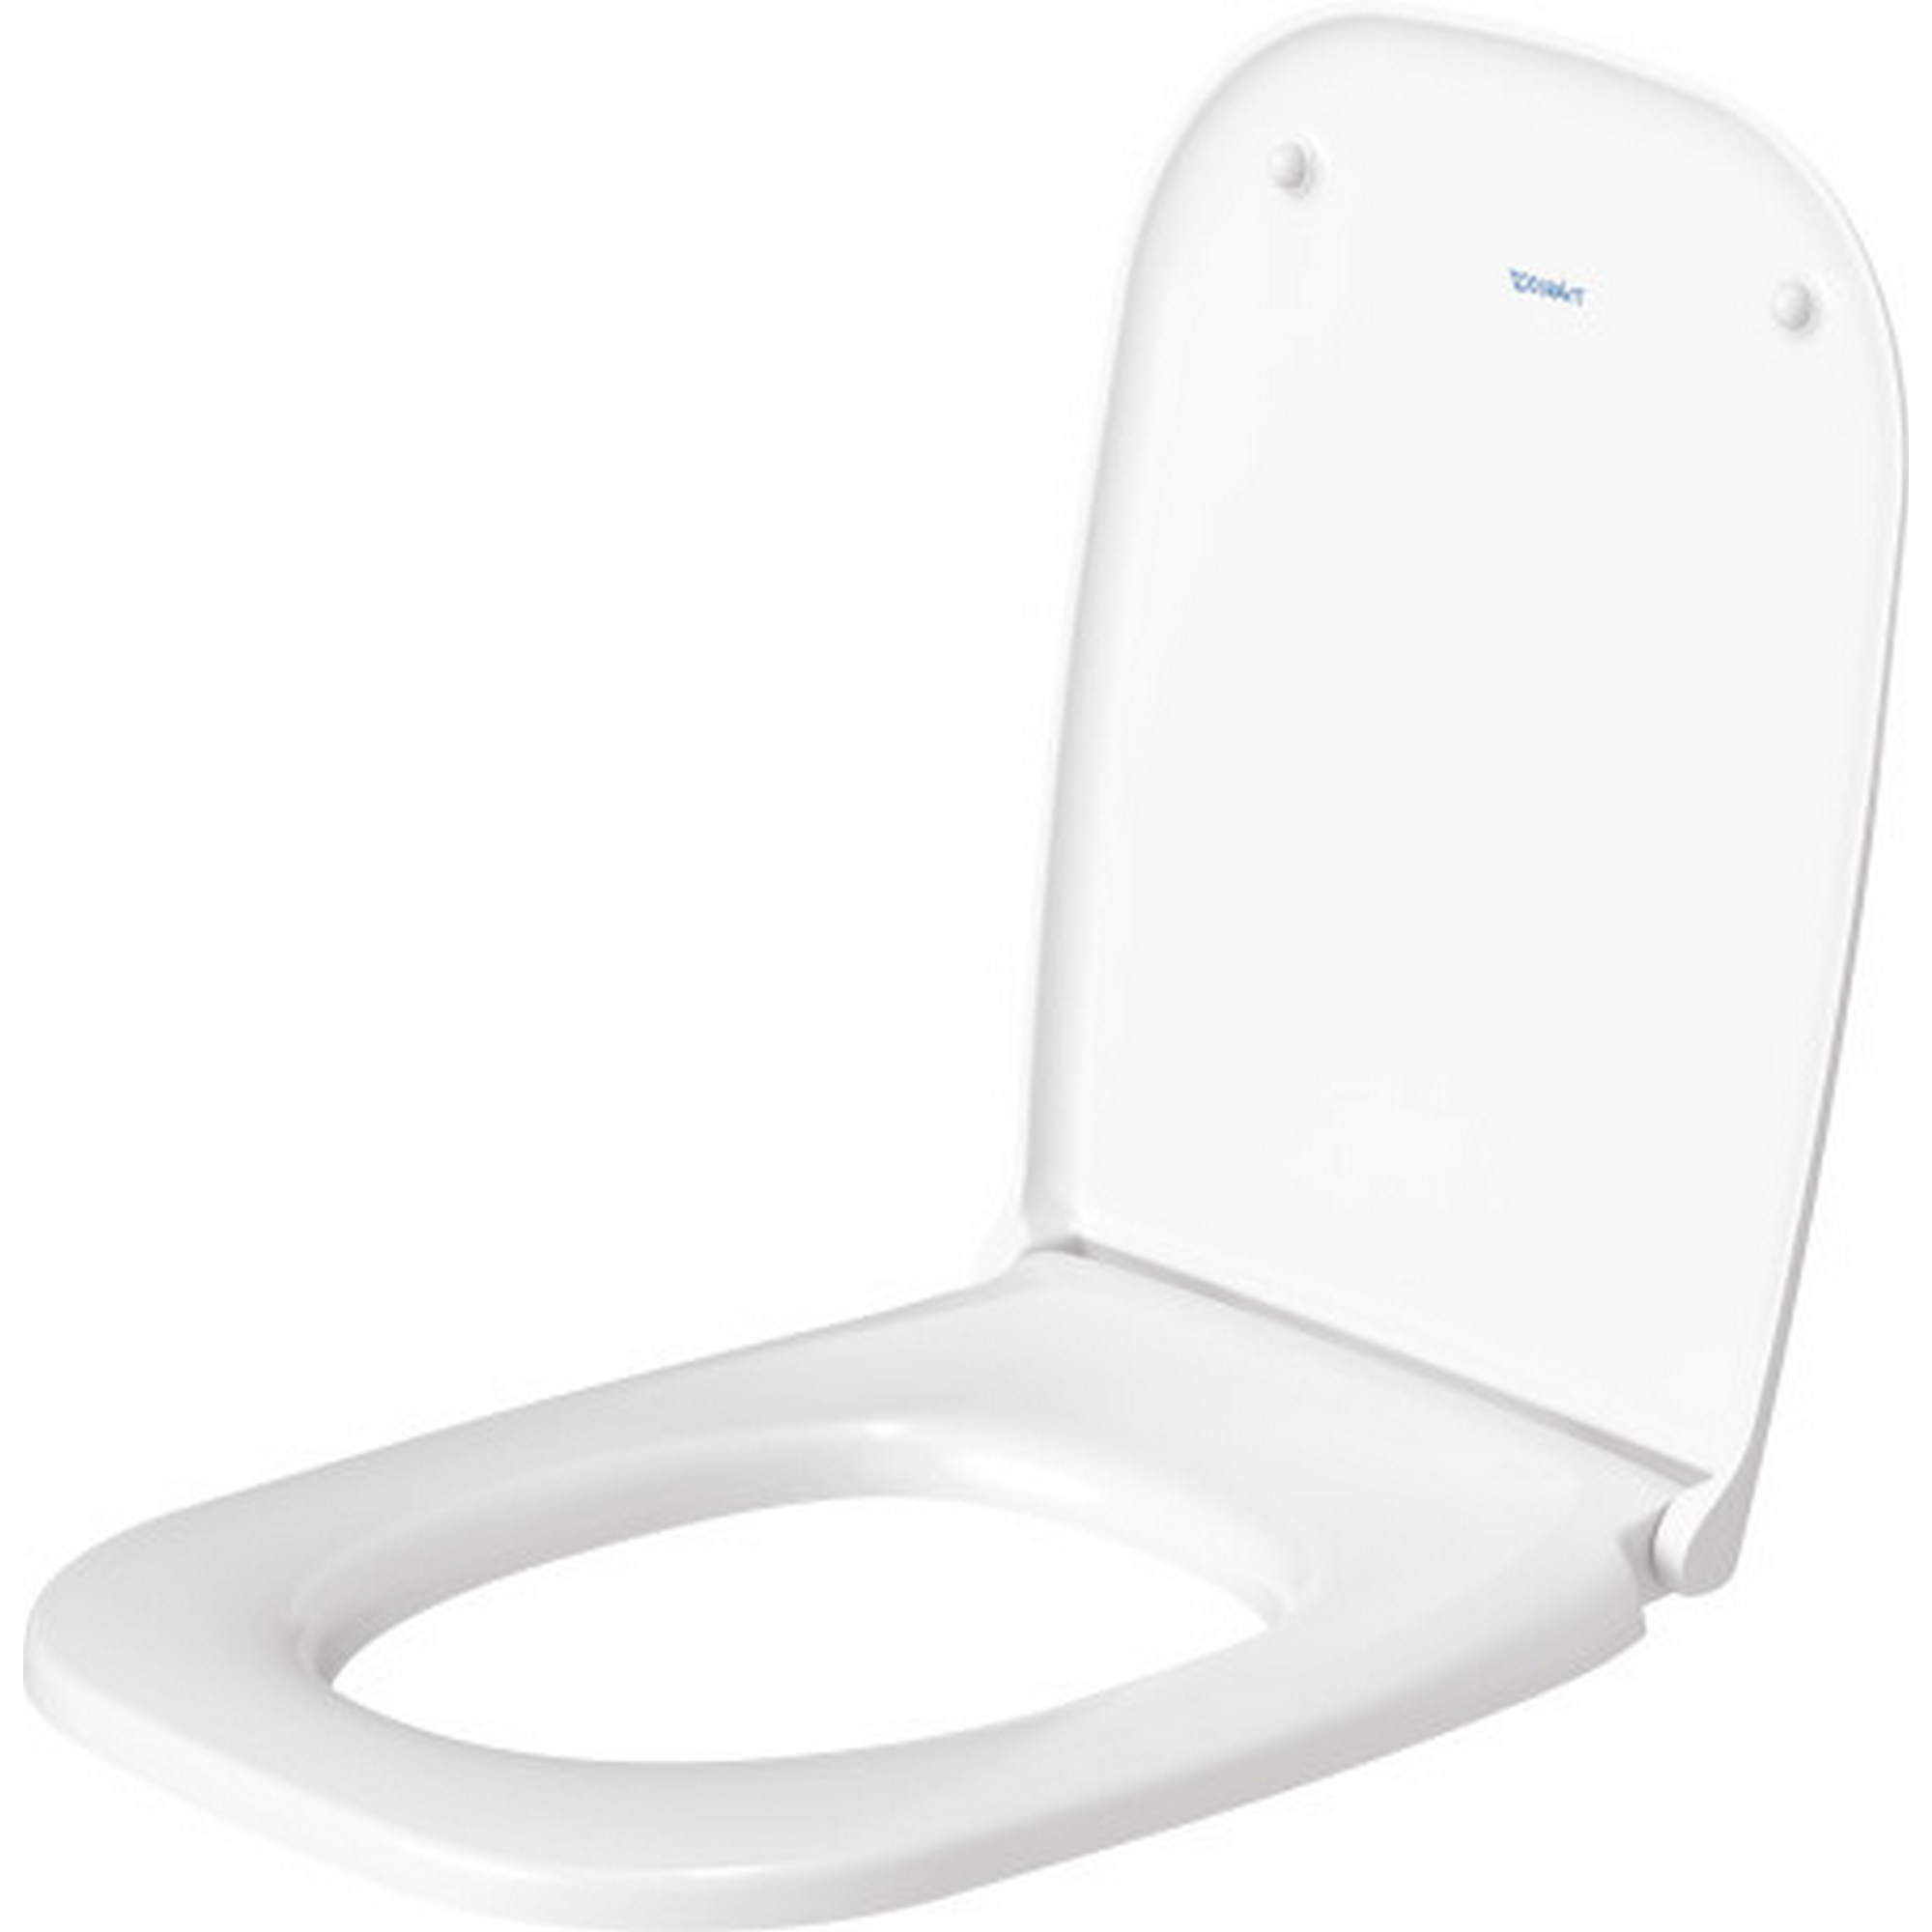 WC-Sitz 'D-Code' mit Absenkautomatik weiß + product picture